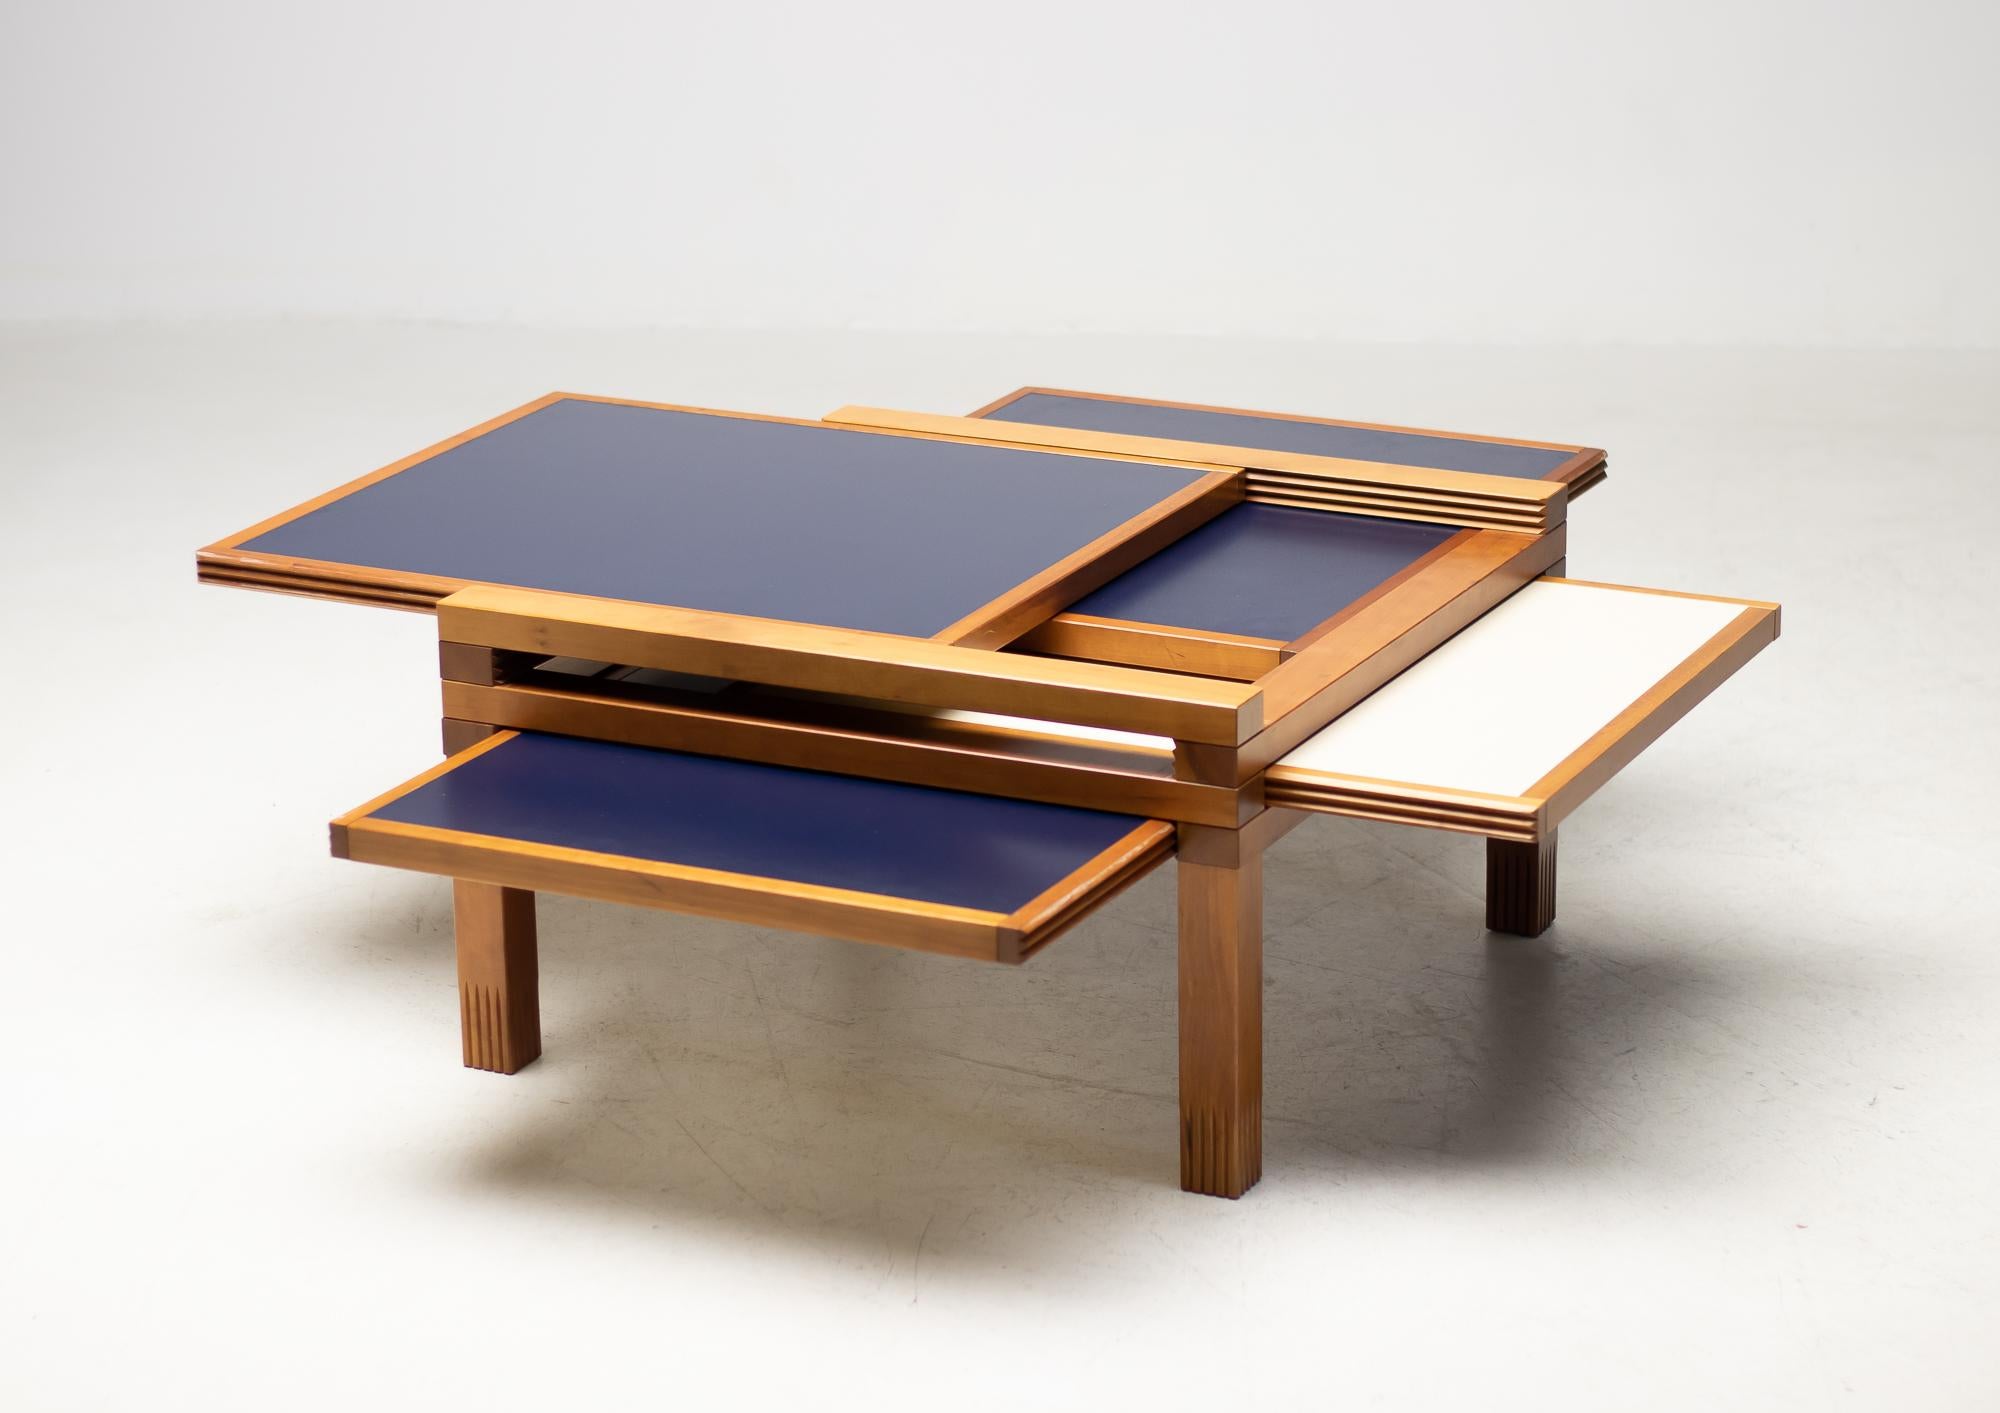 Versatile Bernard Vuarnesson “Hexa” coffee table for Bellato Italy. 
The table is made from iroko wood with reversible dark blue and white laminated extendable tops. 

Measurements: D 70 cm, L 70 cm, H 40 cm.
Extended: L 185 cm.